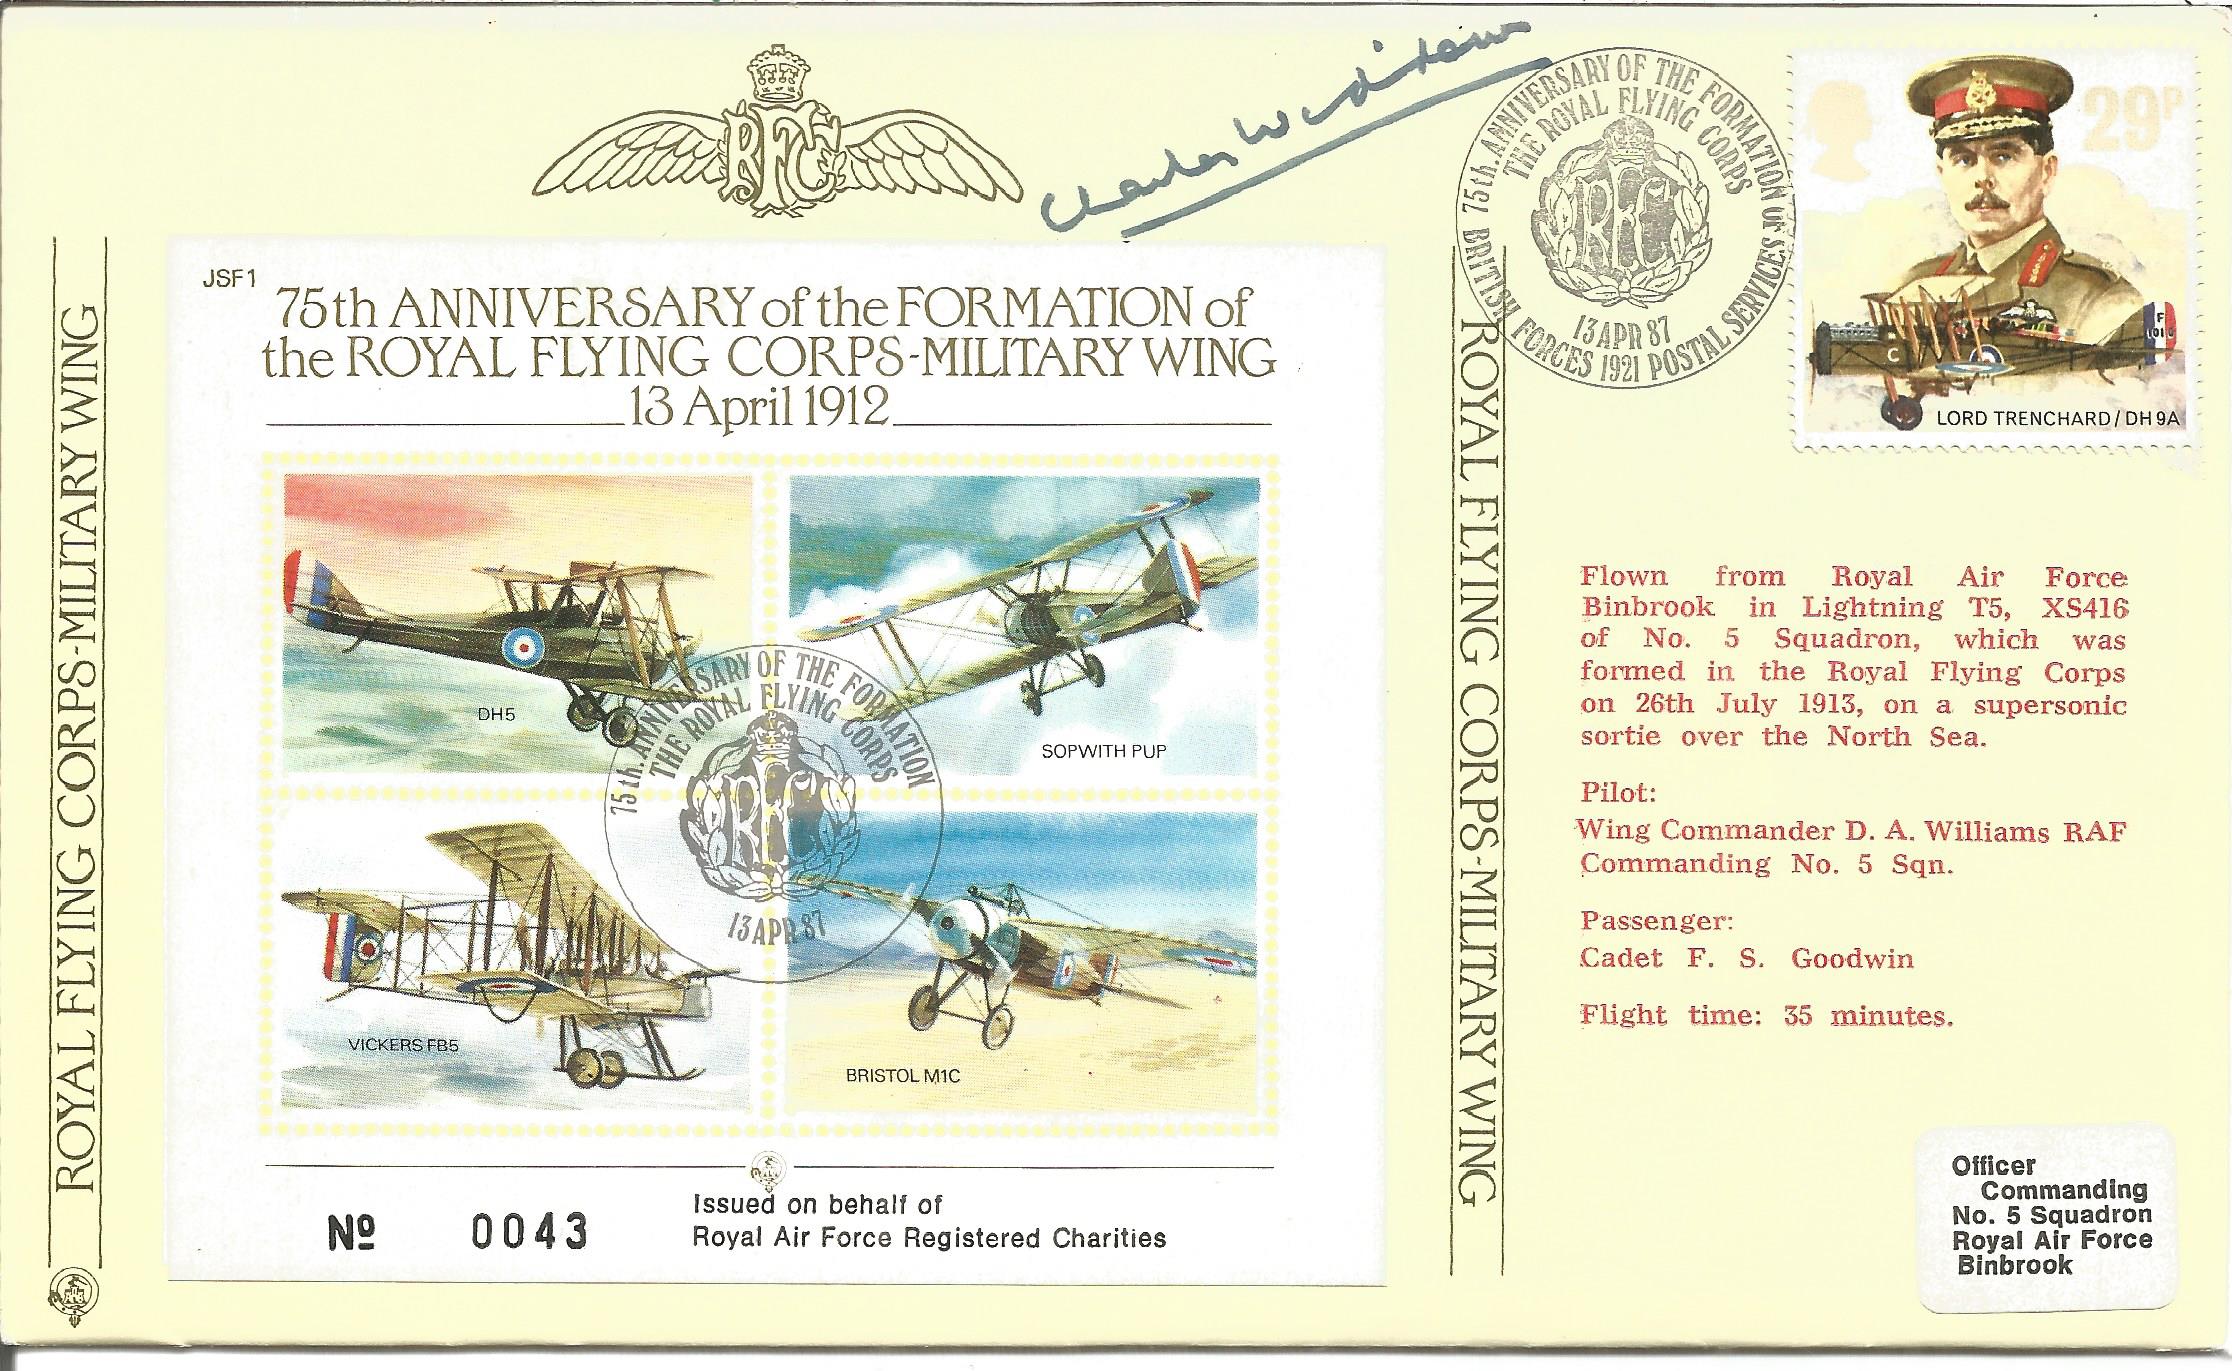 WW2 BOB pilot Air Cmdr S. C. Widdows CB DFC signed 75th Anniversary of the Formation of the Royal